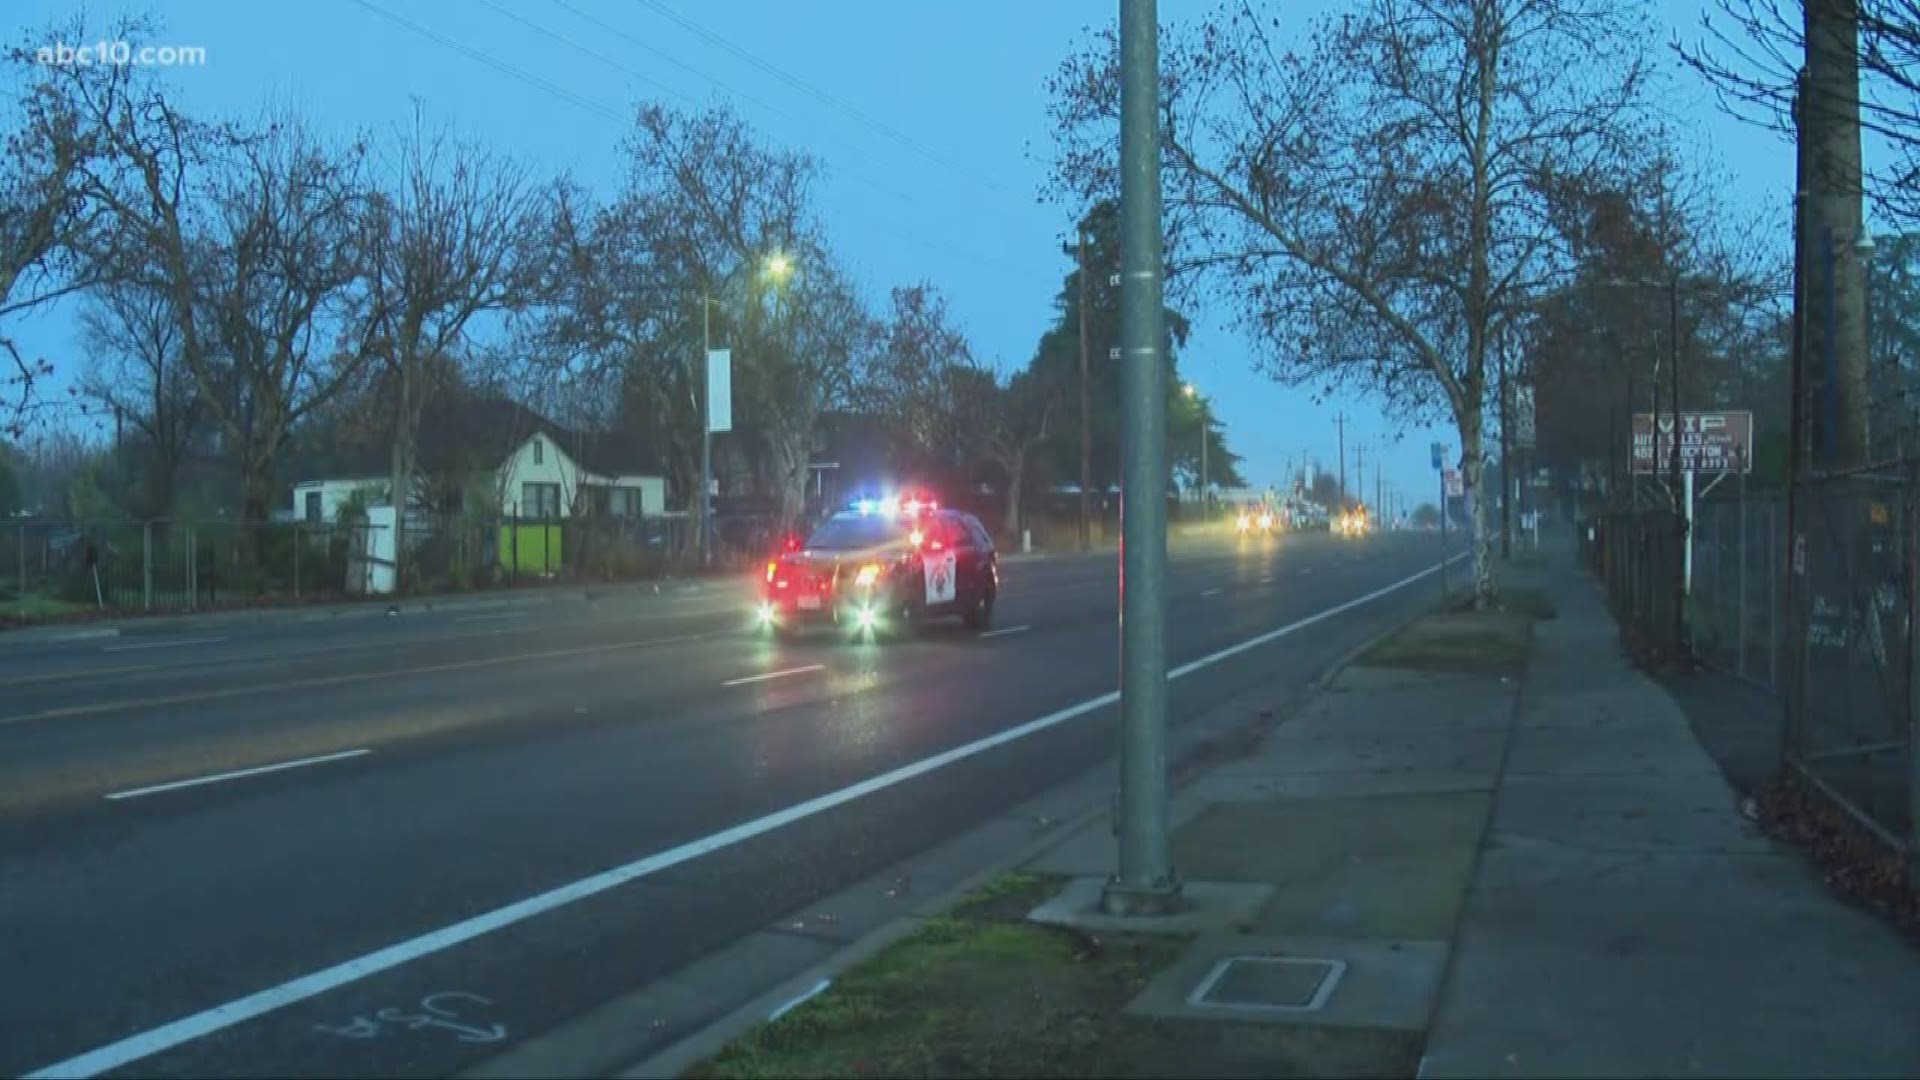 More than 350 SMUD customers are without power in South Sacramento after a car crashed into a power pole early Monday morning.